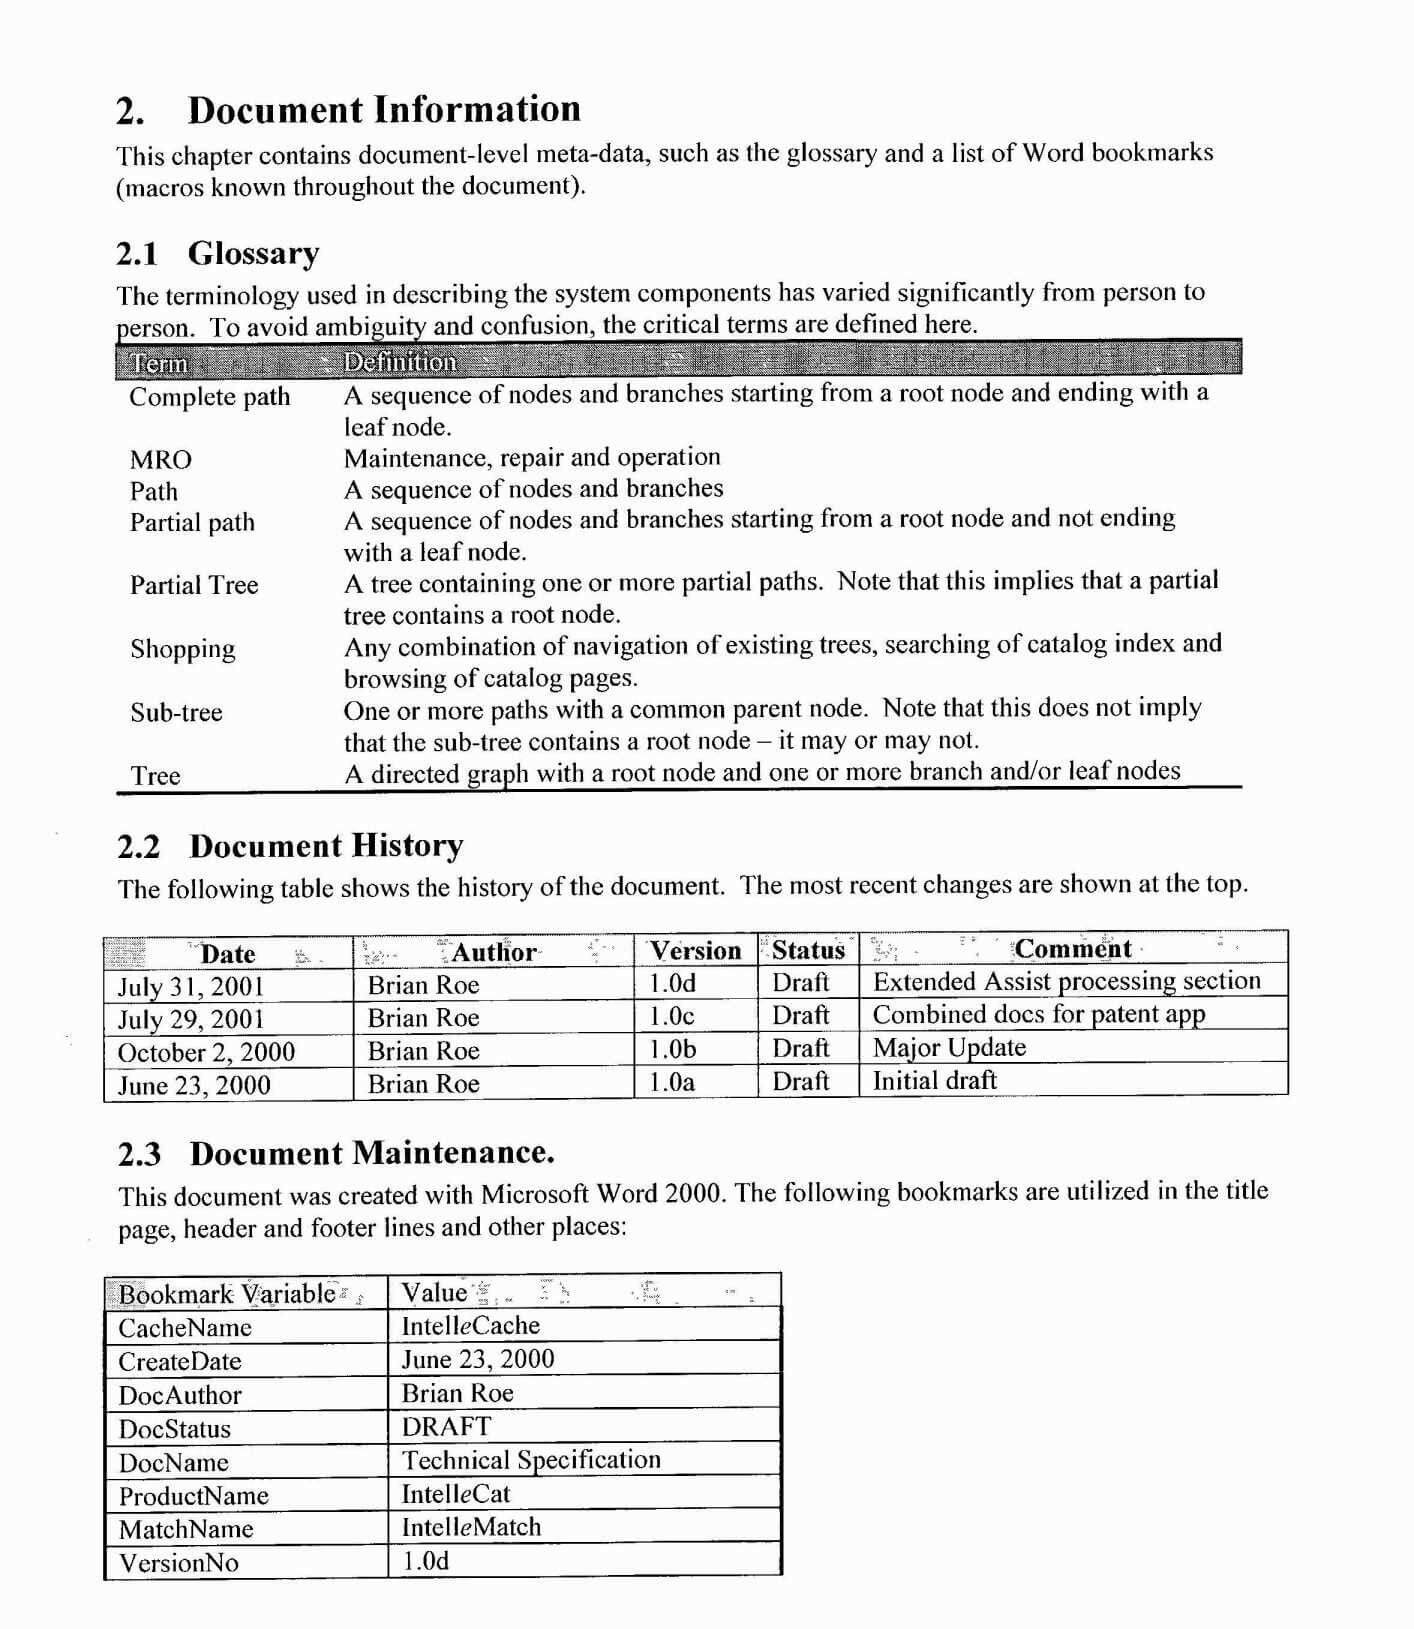 Summary Report Template | Dailovour Intended For Test Summary Report Excel Template